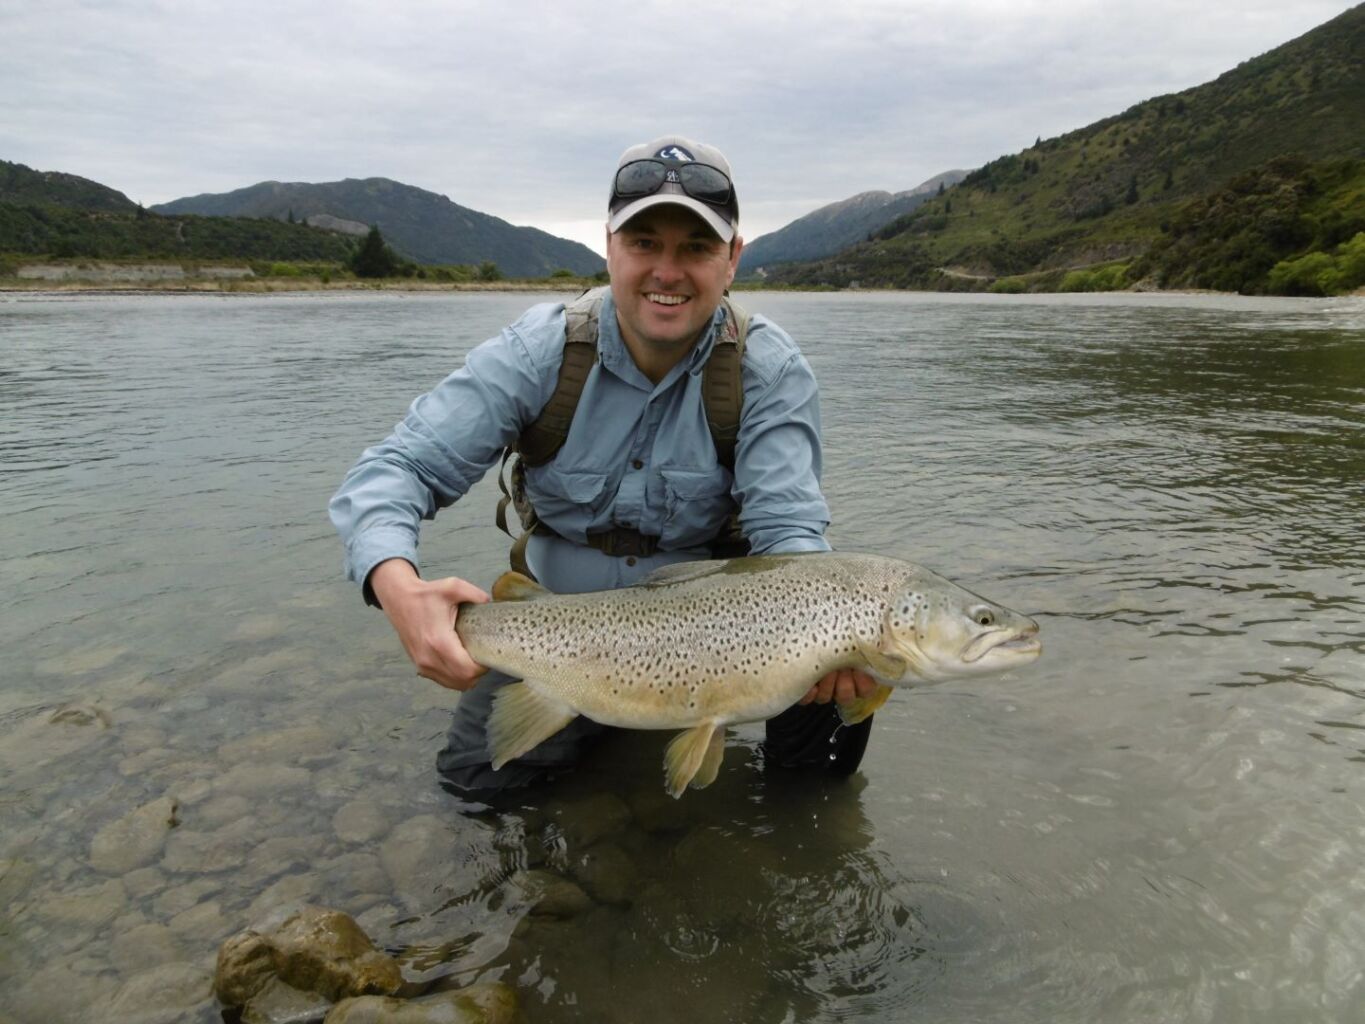 Trout fishing in the back-country rivers of Canterbury, New Zealand